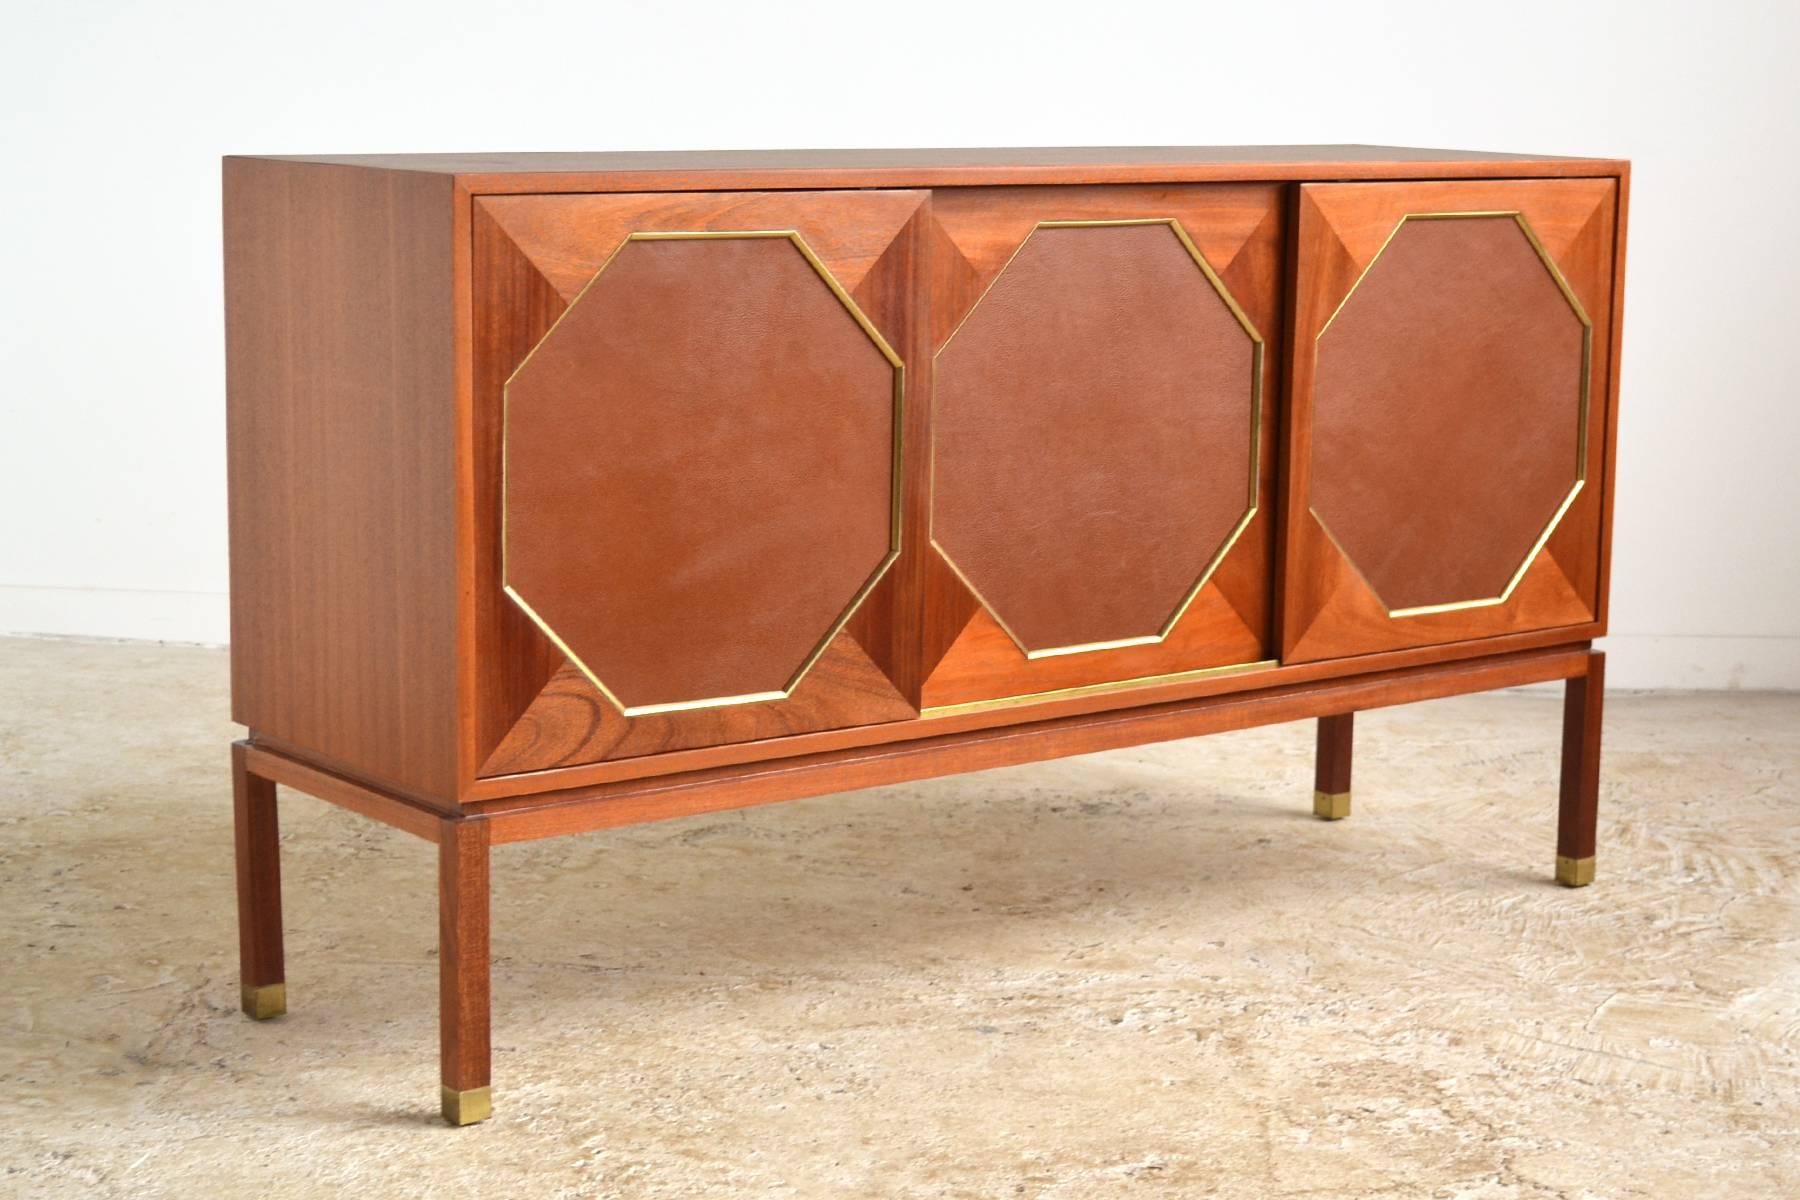 Harvey Probber's refined aesthetic shines in this three-door cabinet. Crafted of mahogany, it has three sliding doors with octagonal leather inserts framed in brass which conceal two compartments with two shallow slide-out drawers/ shelves and one